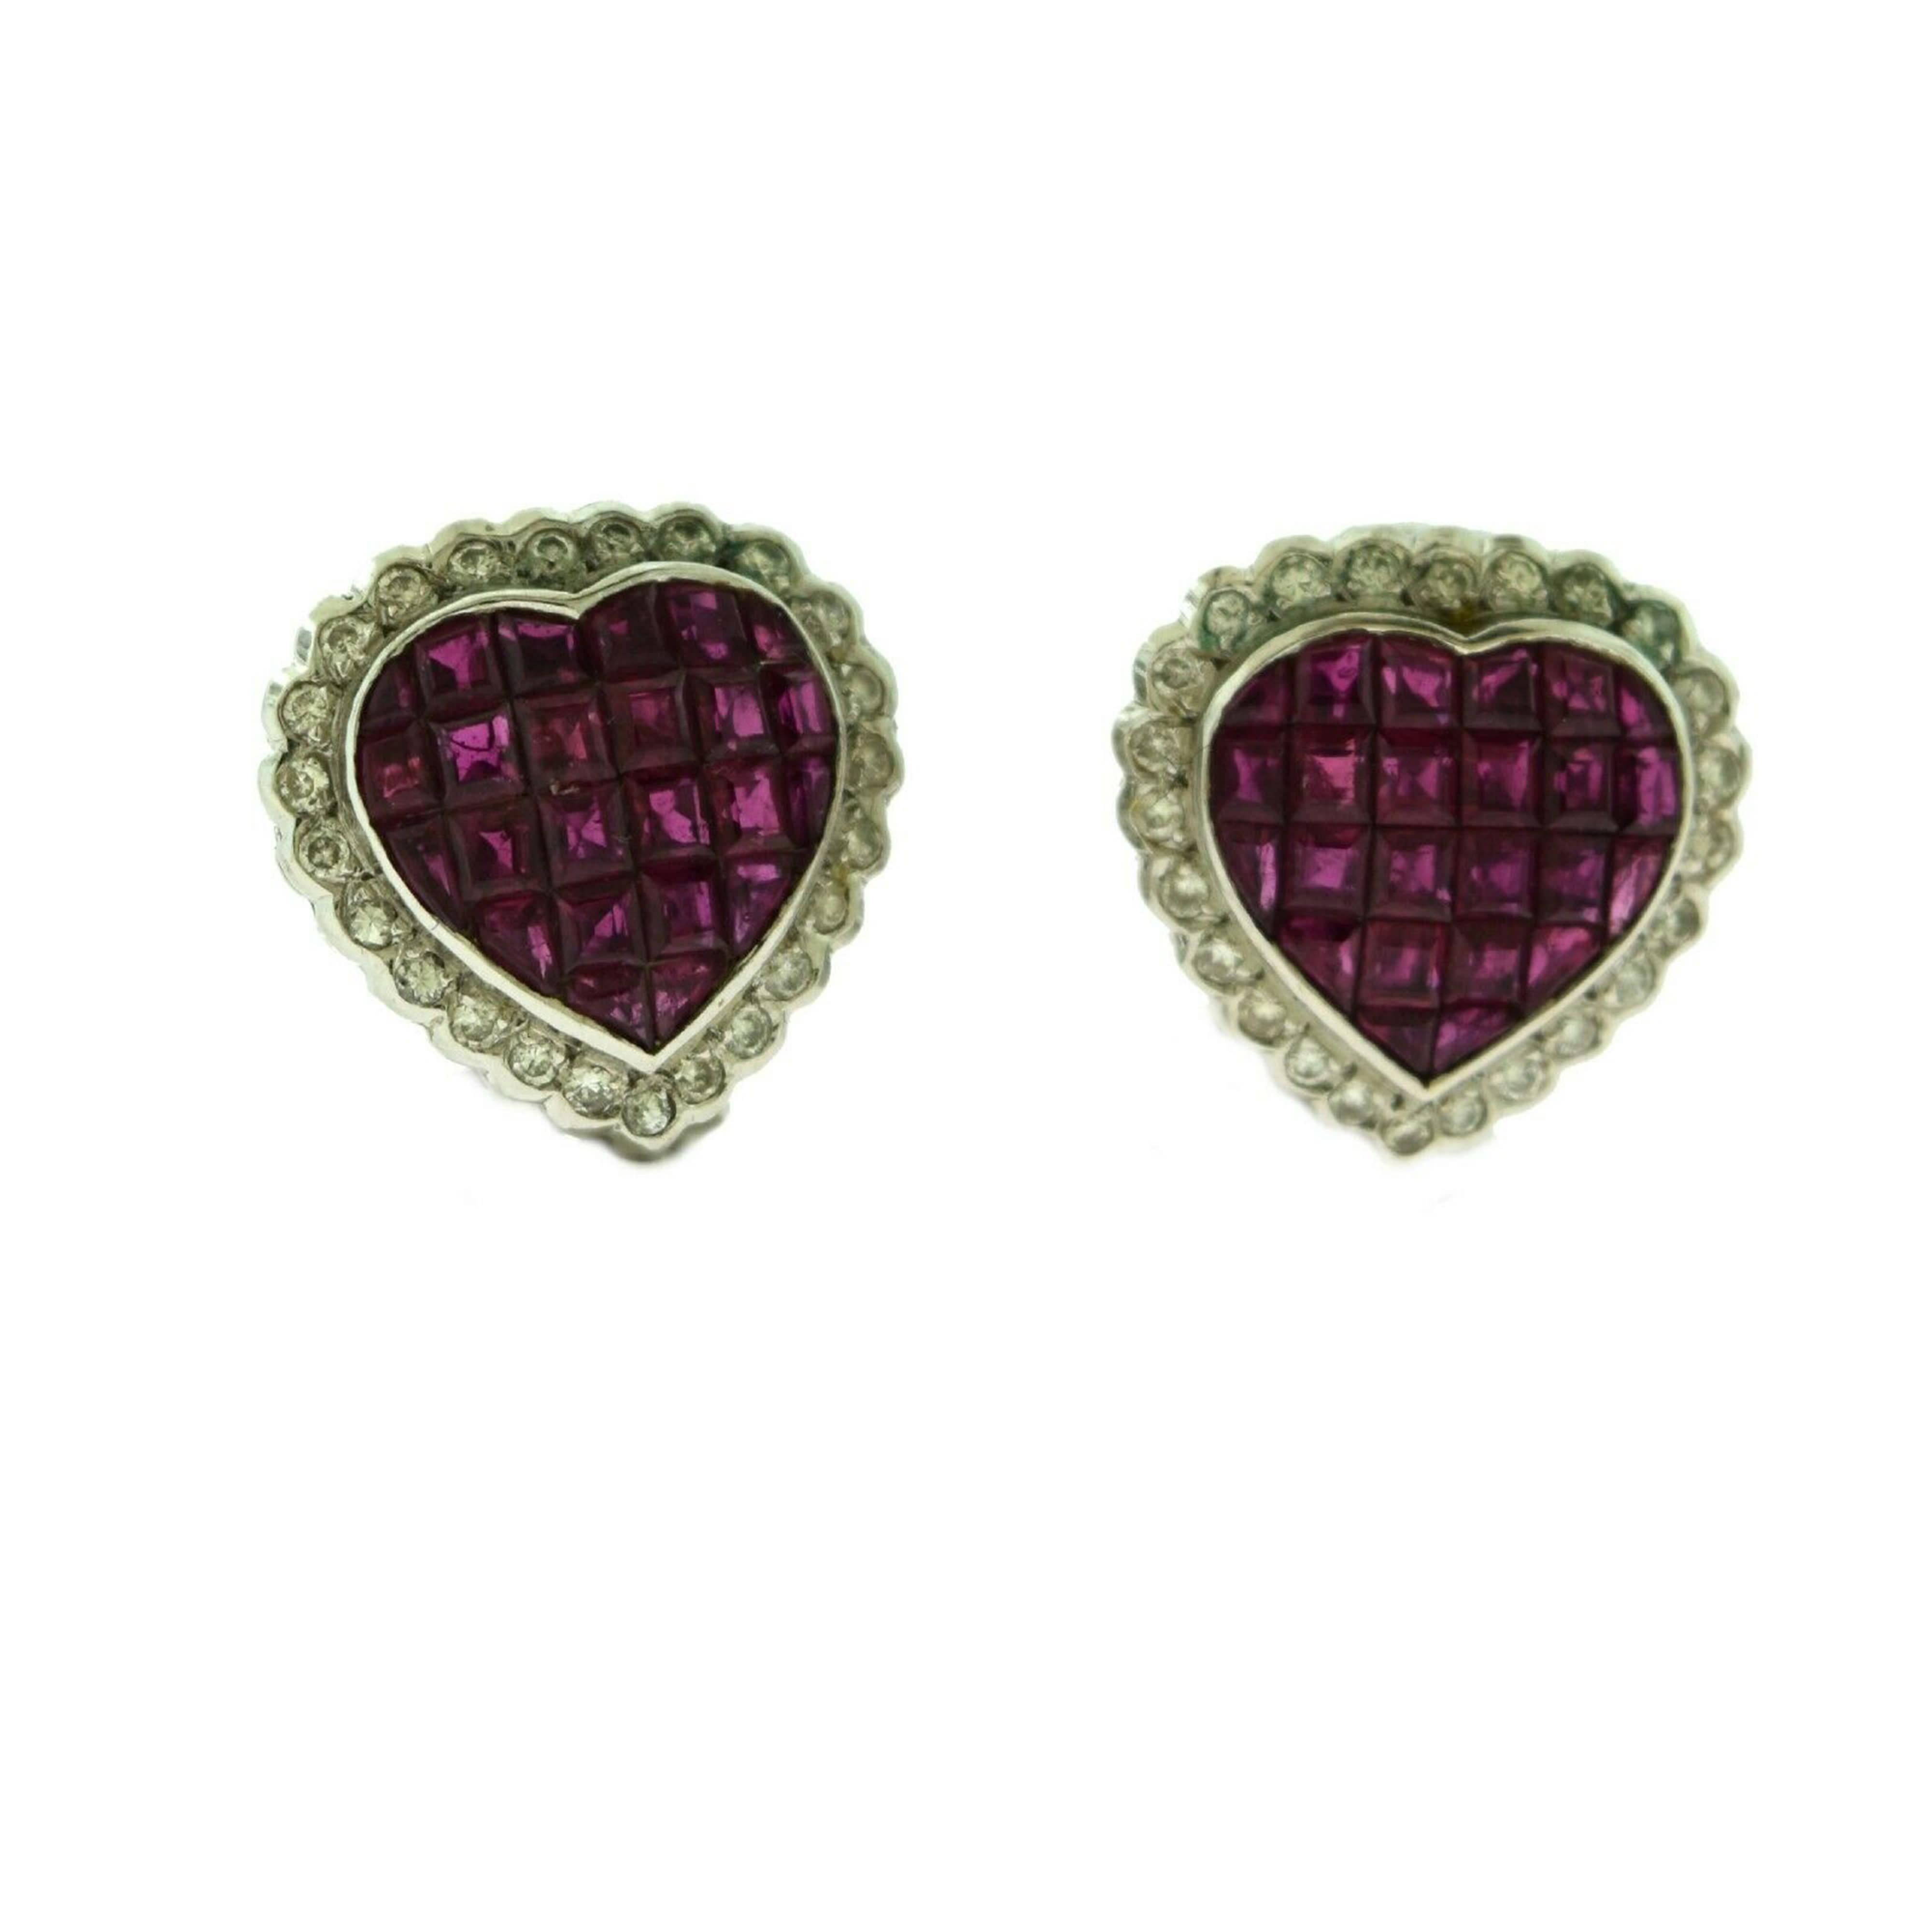 Brilliance Jewels, Miami
Questions? Call Us Anytime!
786,482,8100

Earring Dimensions: 0.5 inches x 0.5 inches

Style: Heart Studs

Metal Type: White Gold

Metal Purity: 18k

Stones: Round Diamonds

                 Emerald Cut Rubies

Diamond